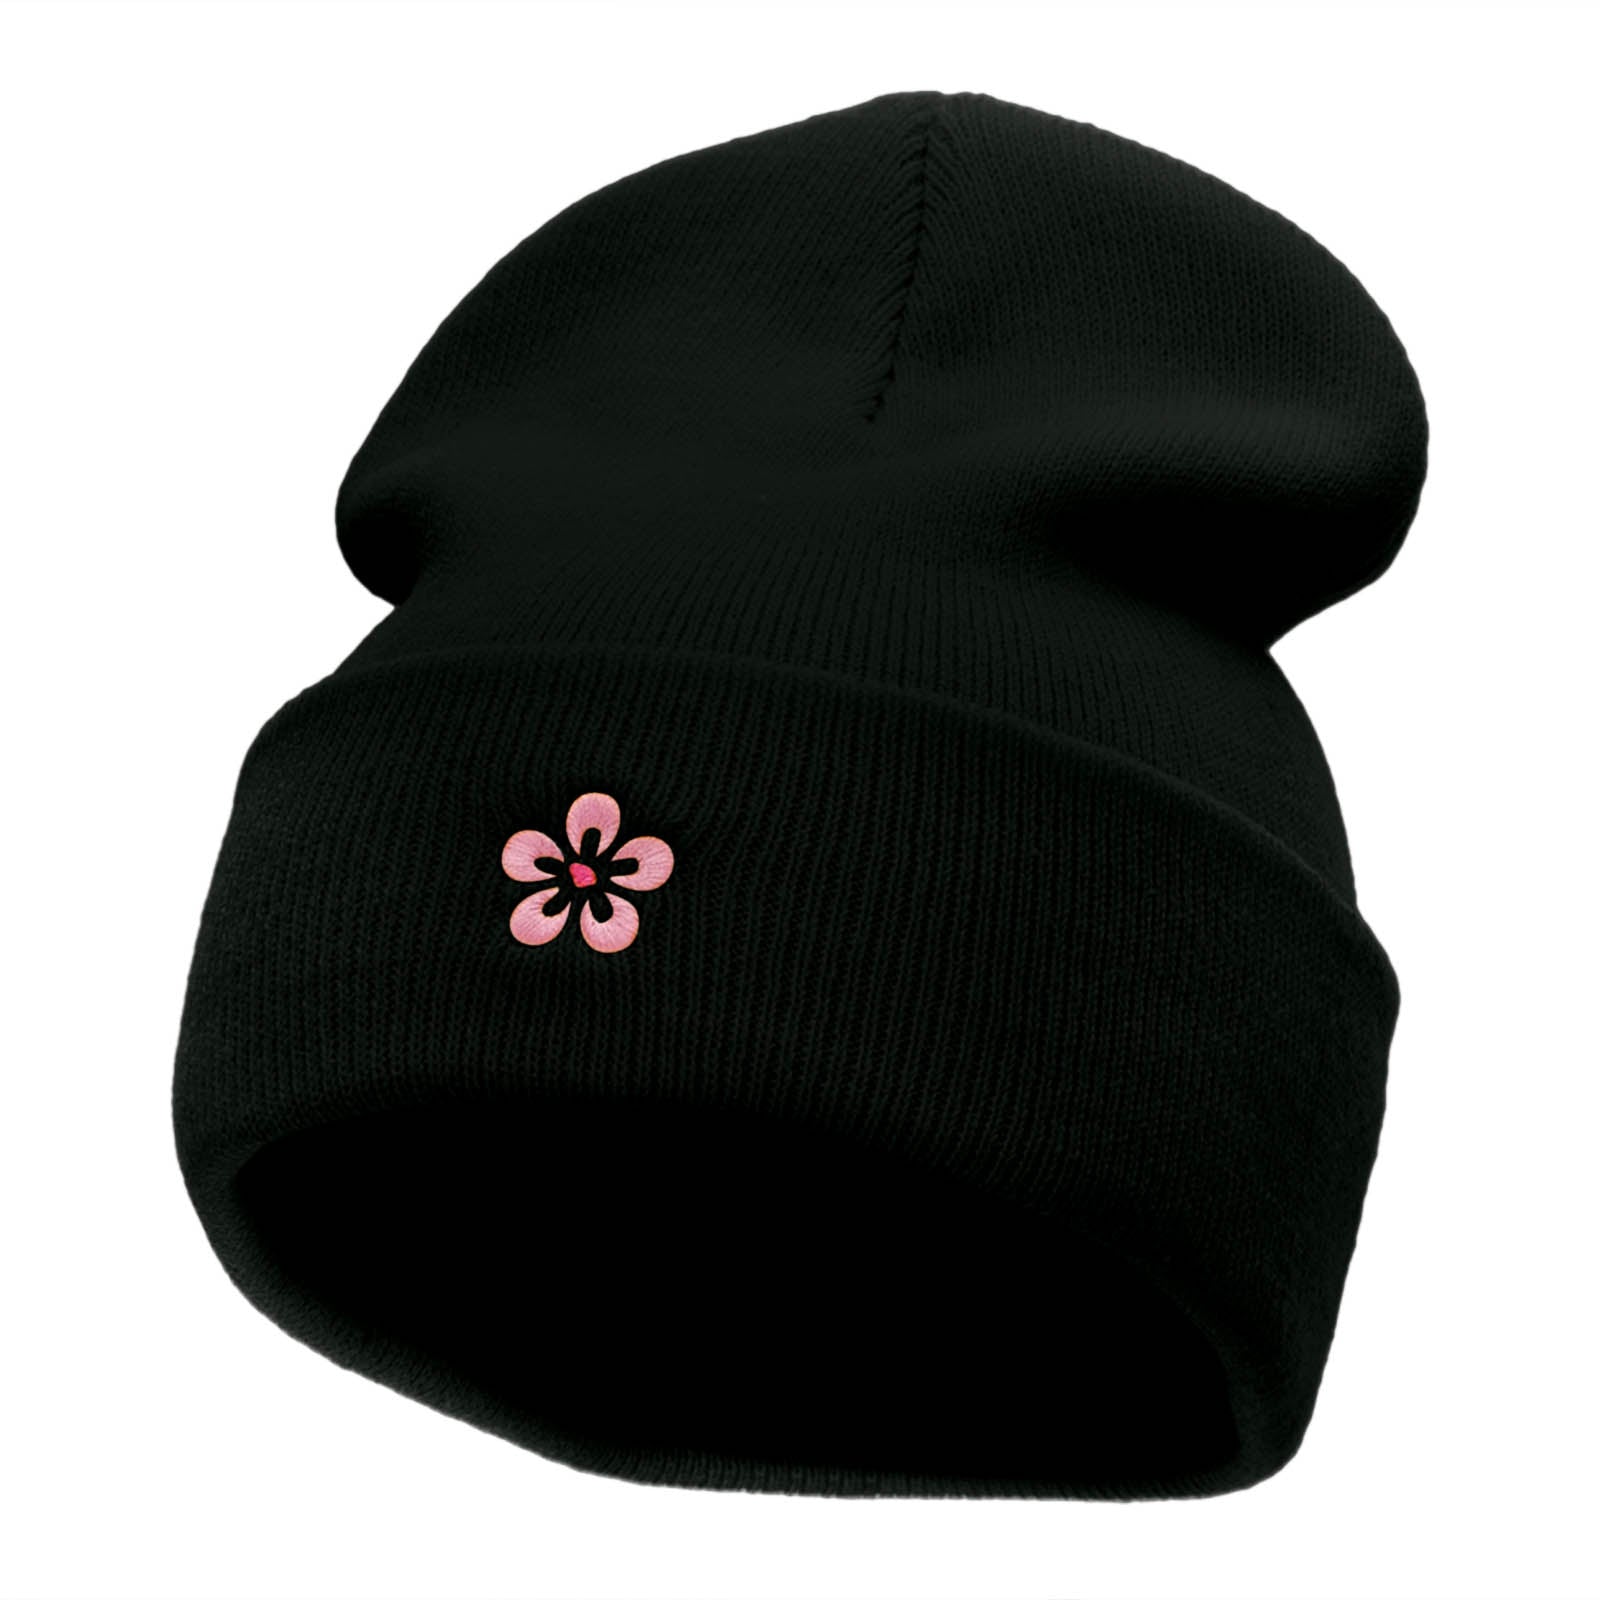 Japanese Cherry Blossom Embroidered 12 Inch Long Knitted Beanie - Black OSFM